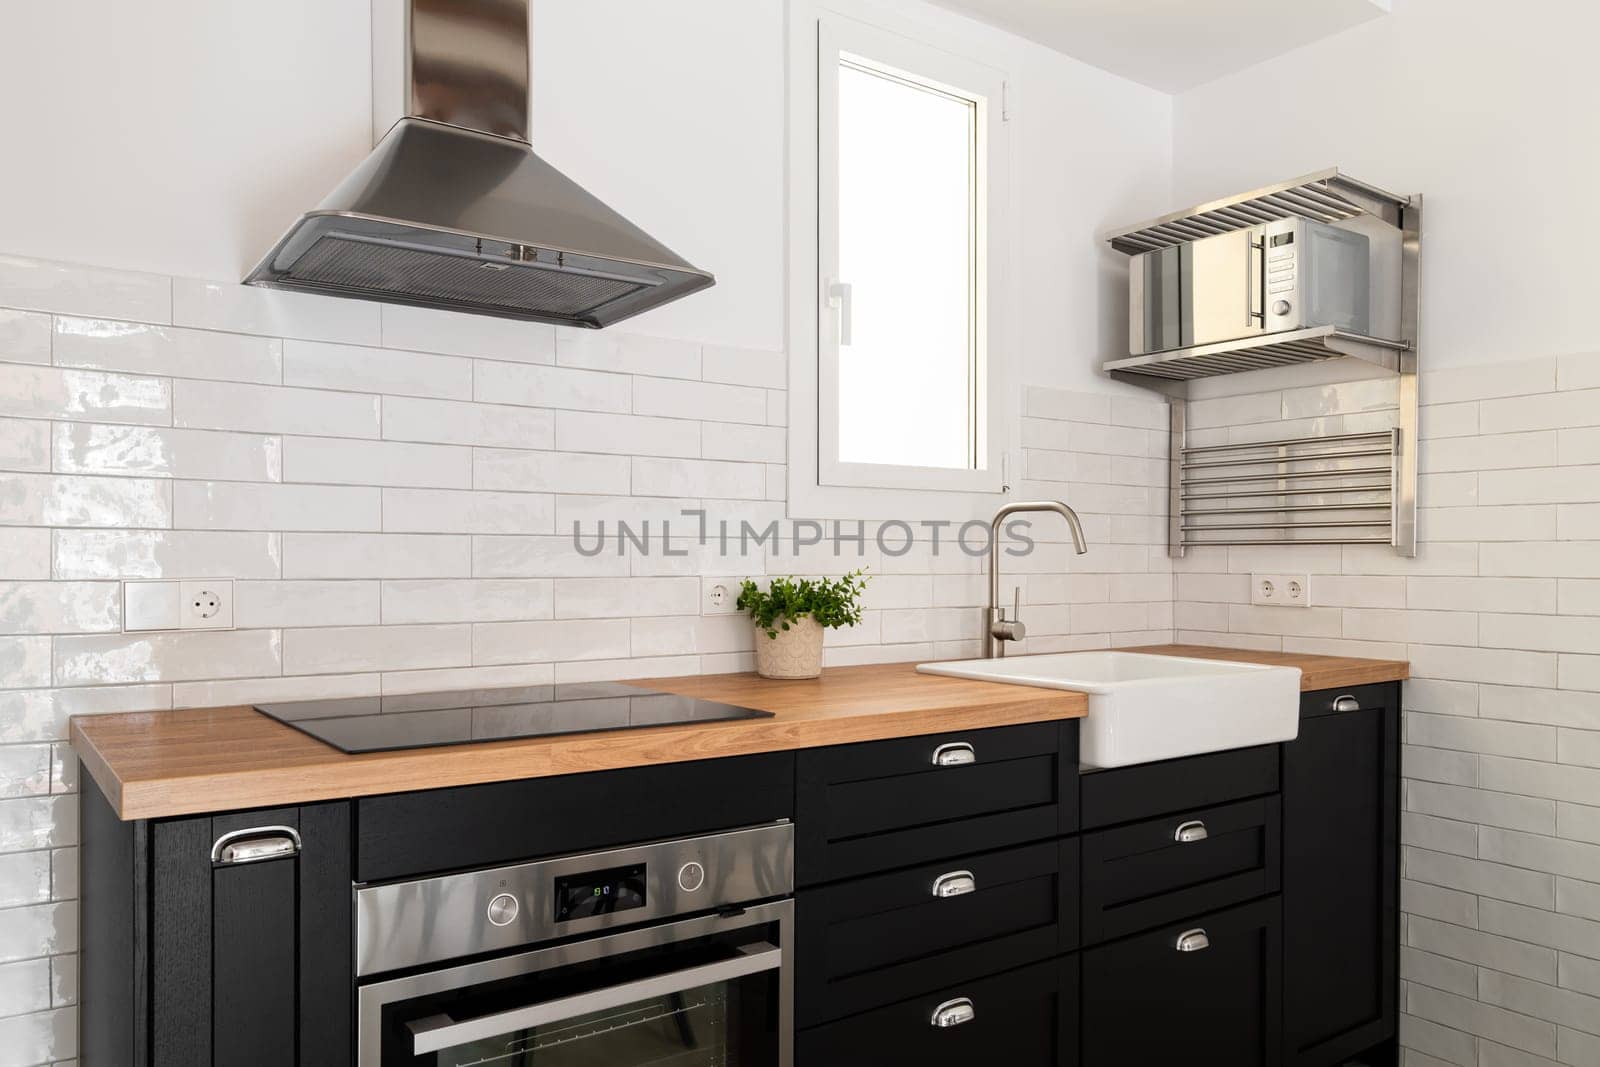 Comfortable and stylish kitchen in Scandinavian minimalist style with wooden countertops and black fronts on the background of white tiles. Kitchen concept in modern European residential complexes.